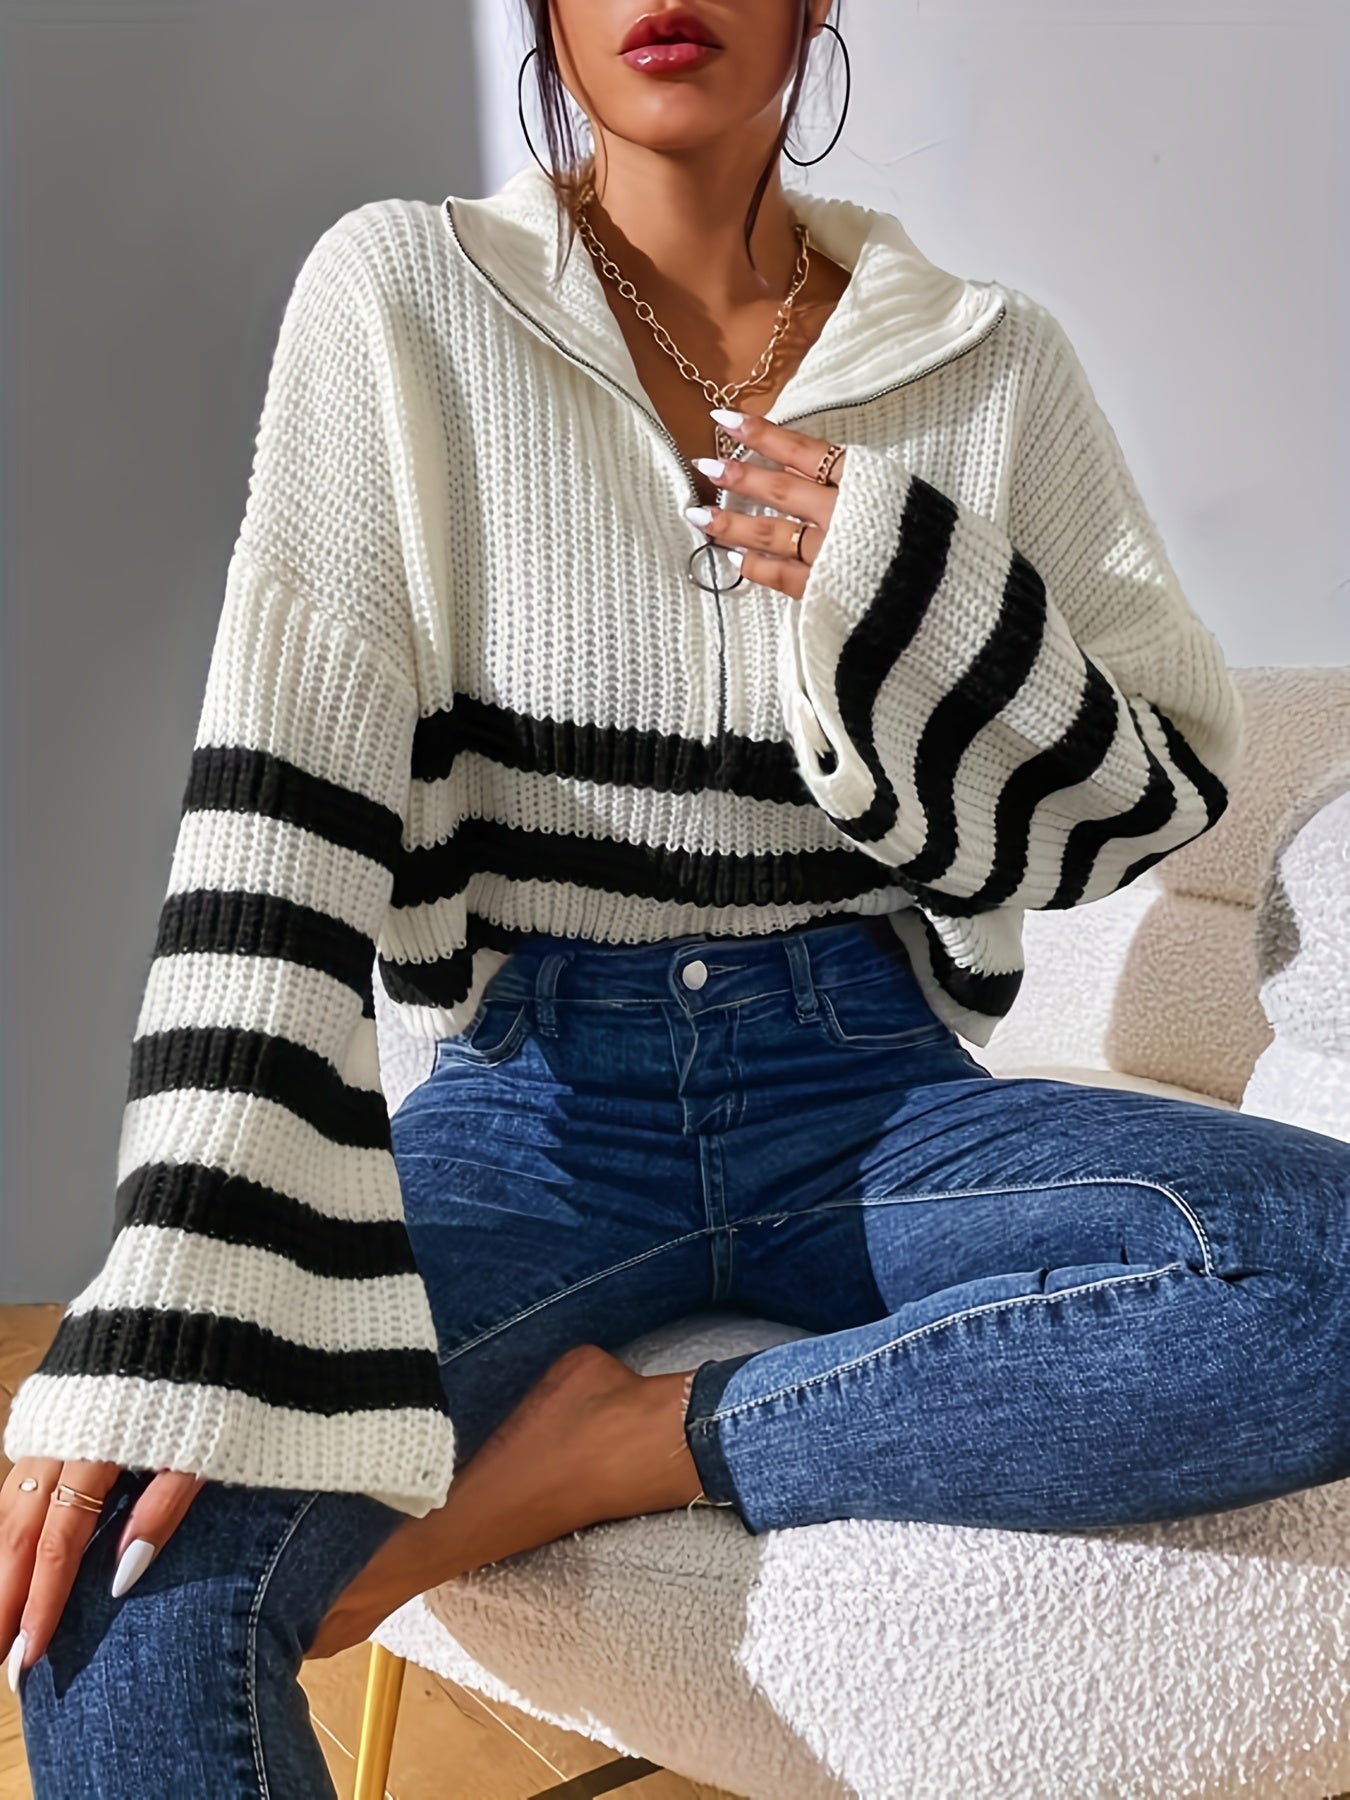 Antmvs Striped Pattern Half Zip Pullover Sweater, Casual Bell Sleeve Sweater For Fall & Winter, Women's Clothing